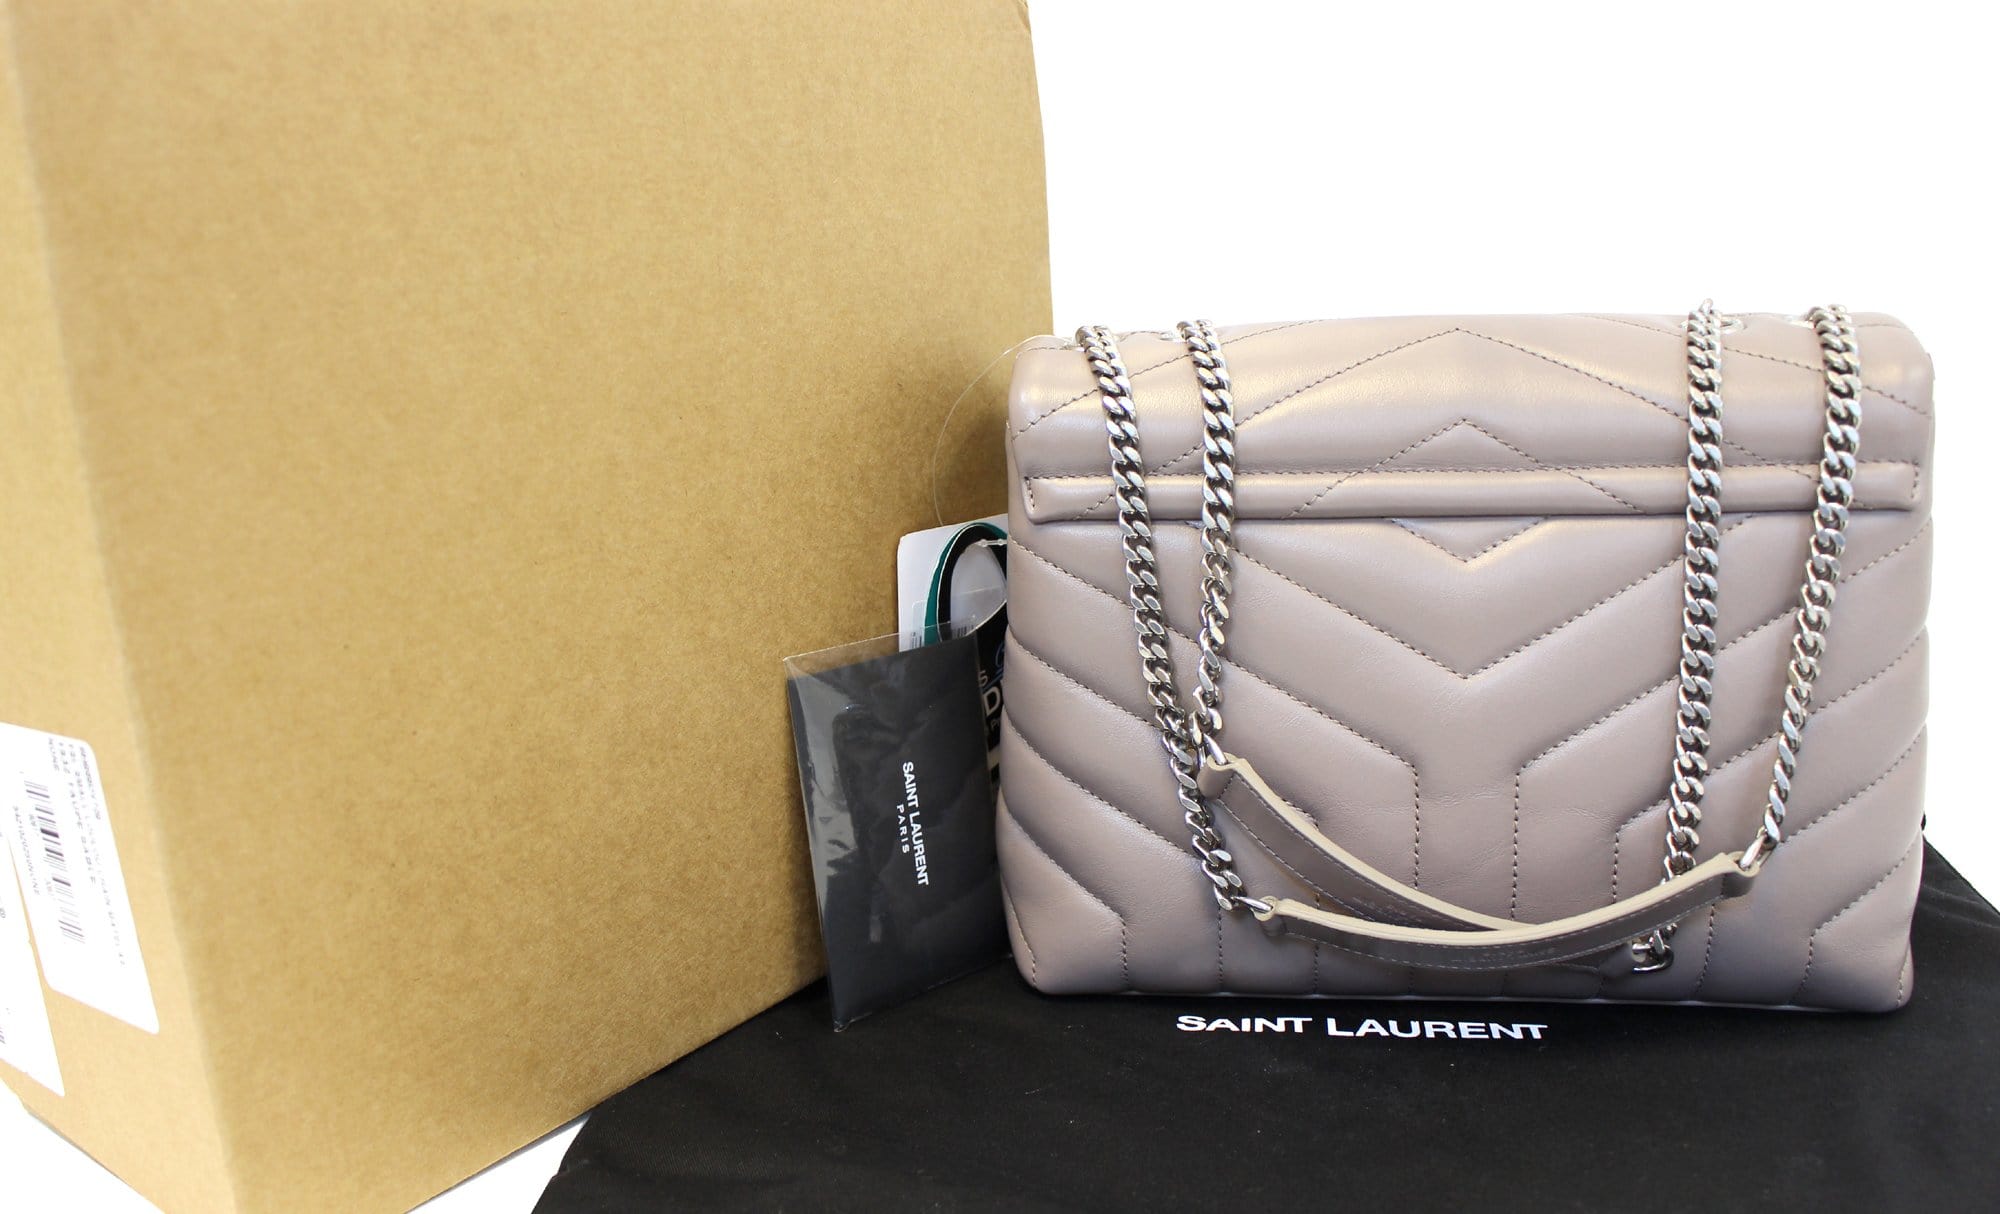 Saint Laurent Small Loulou Chain Bag in Grey